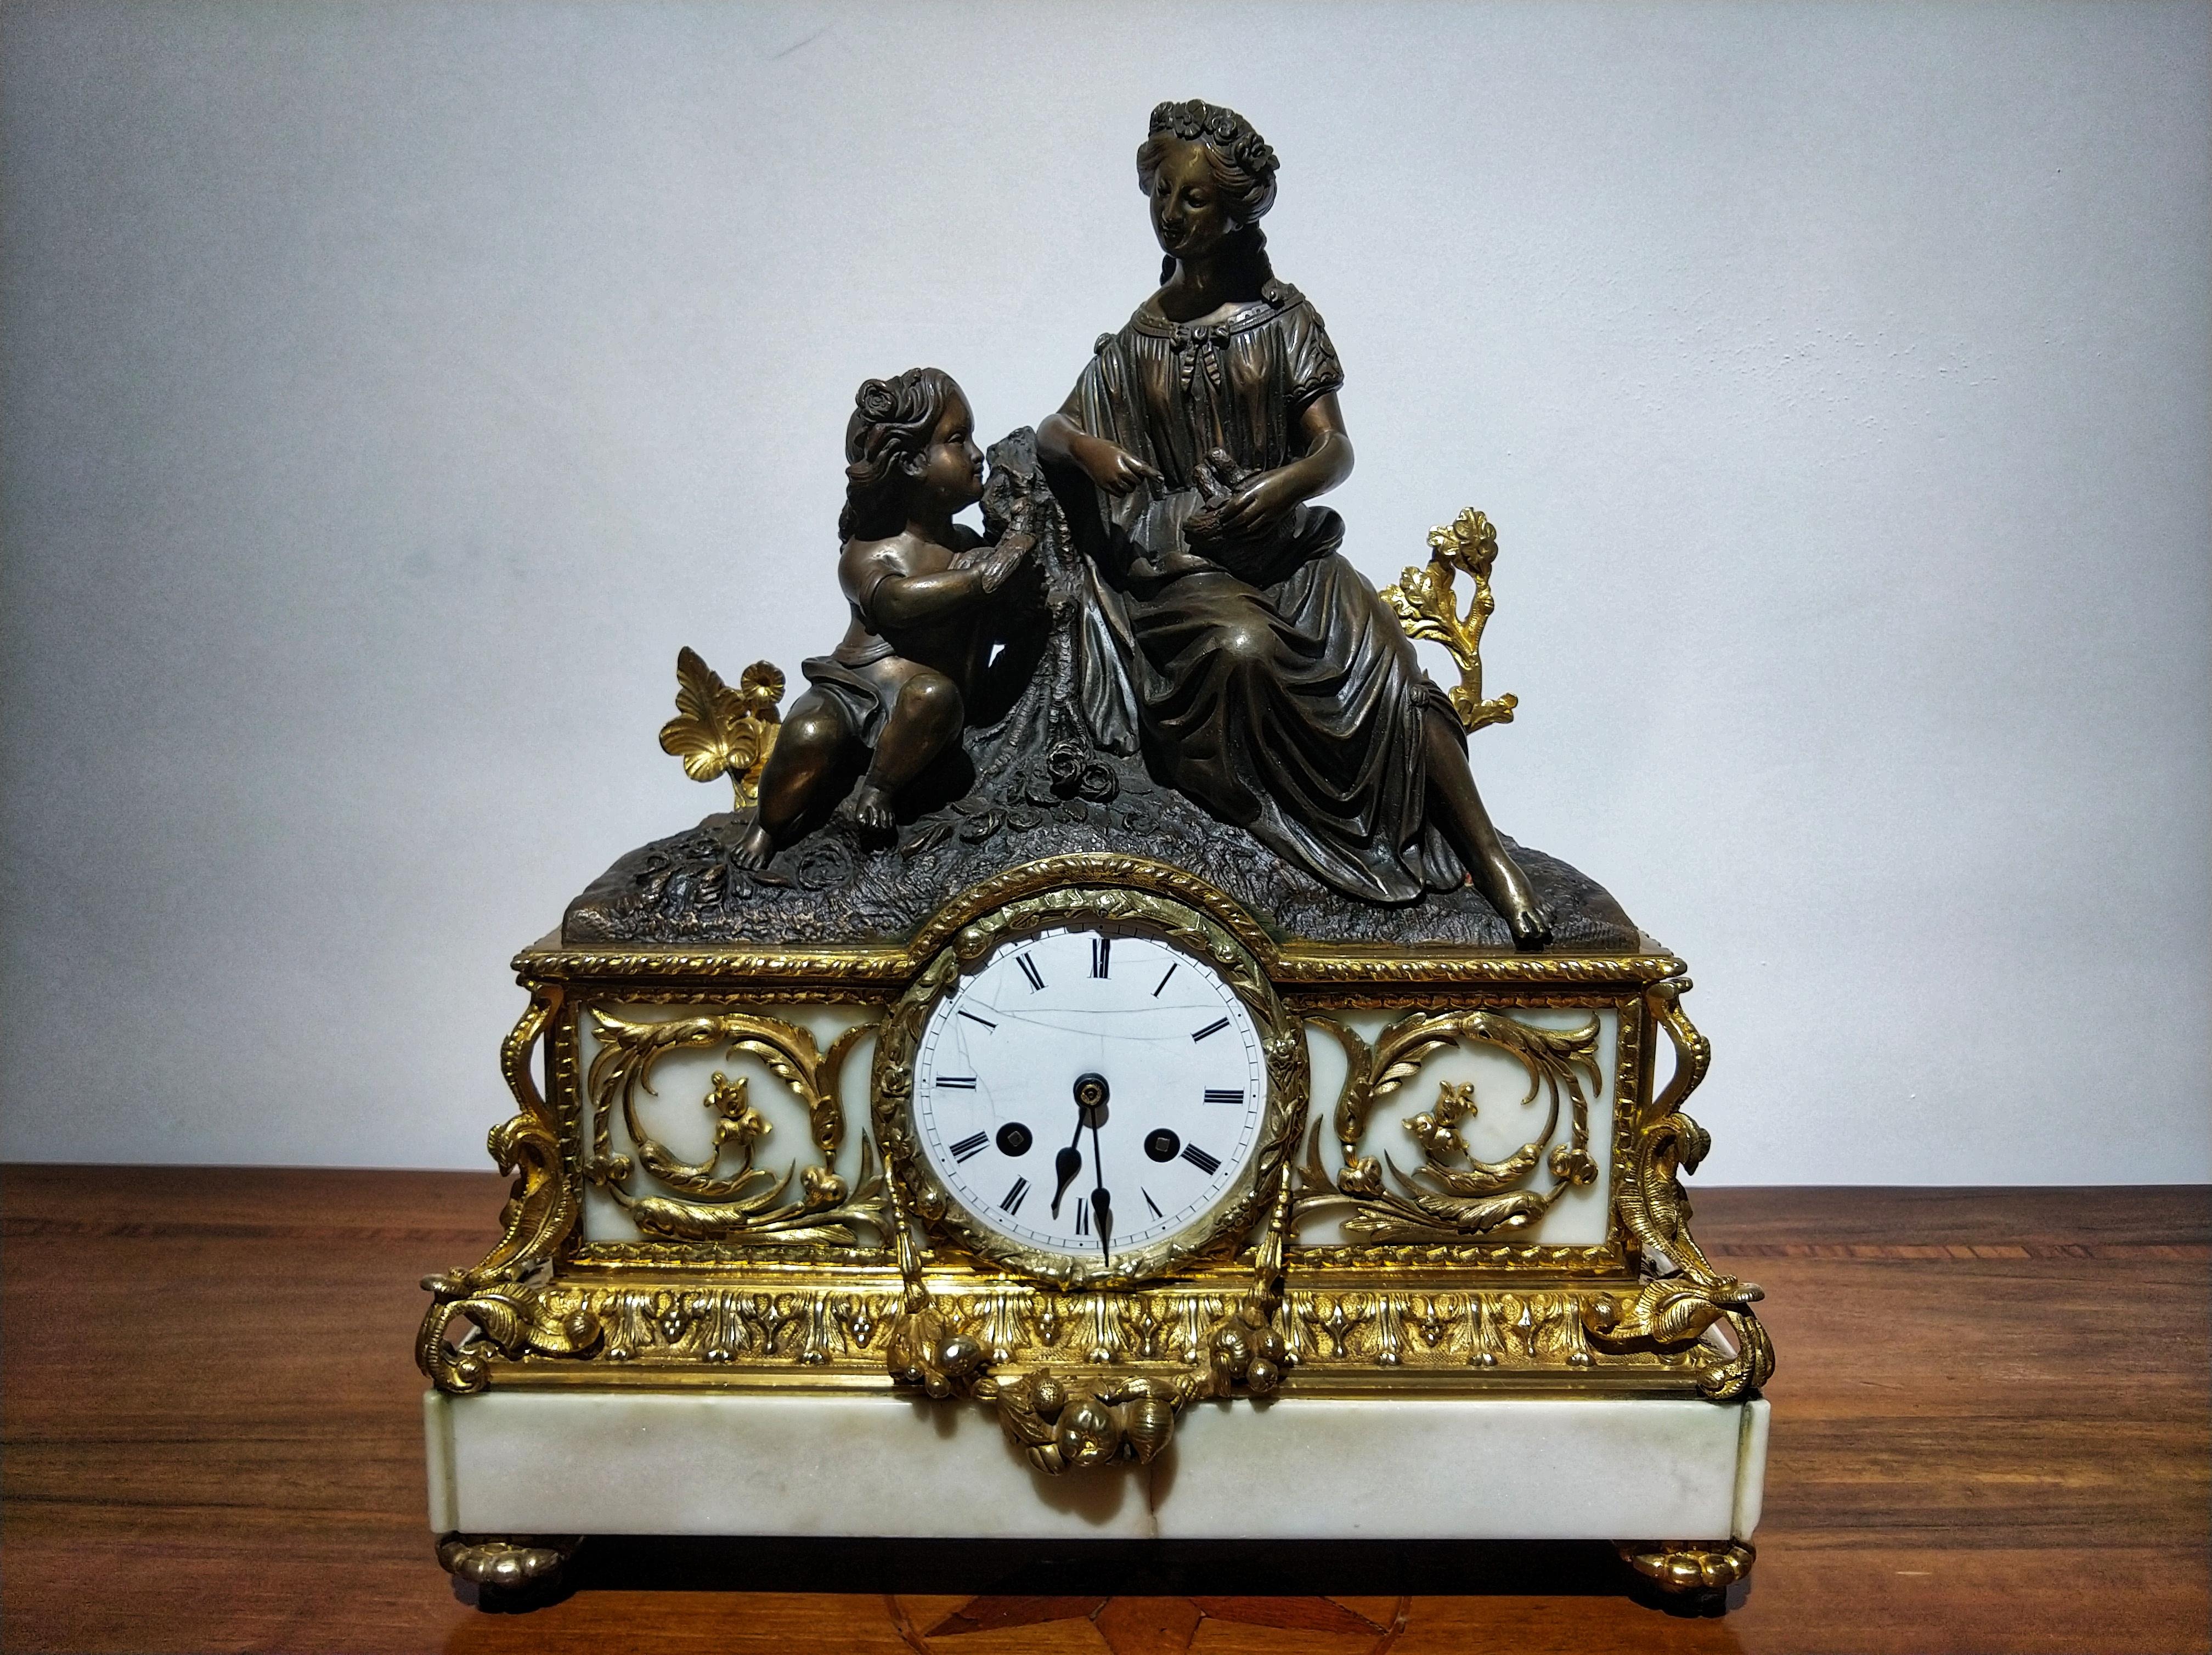 Elegant Napoleon III mantel clock by Japy Freres & Cie with a woman and a child leaning on a log, saving a bird's nest. The central part is full of floral motifs of gilded bronze with white marble as a background, the dial is ceramic and at the